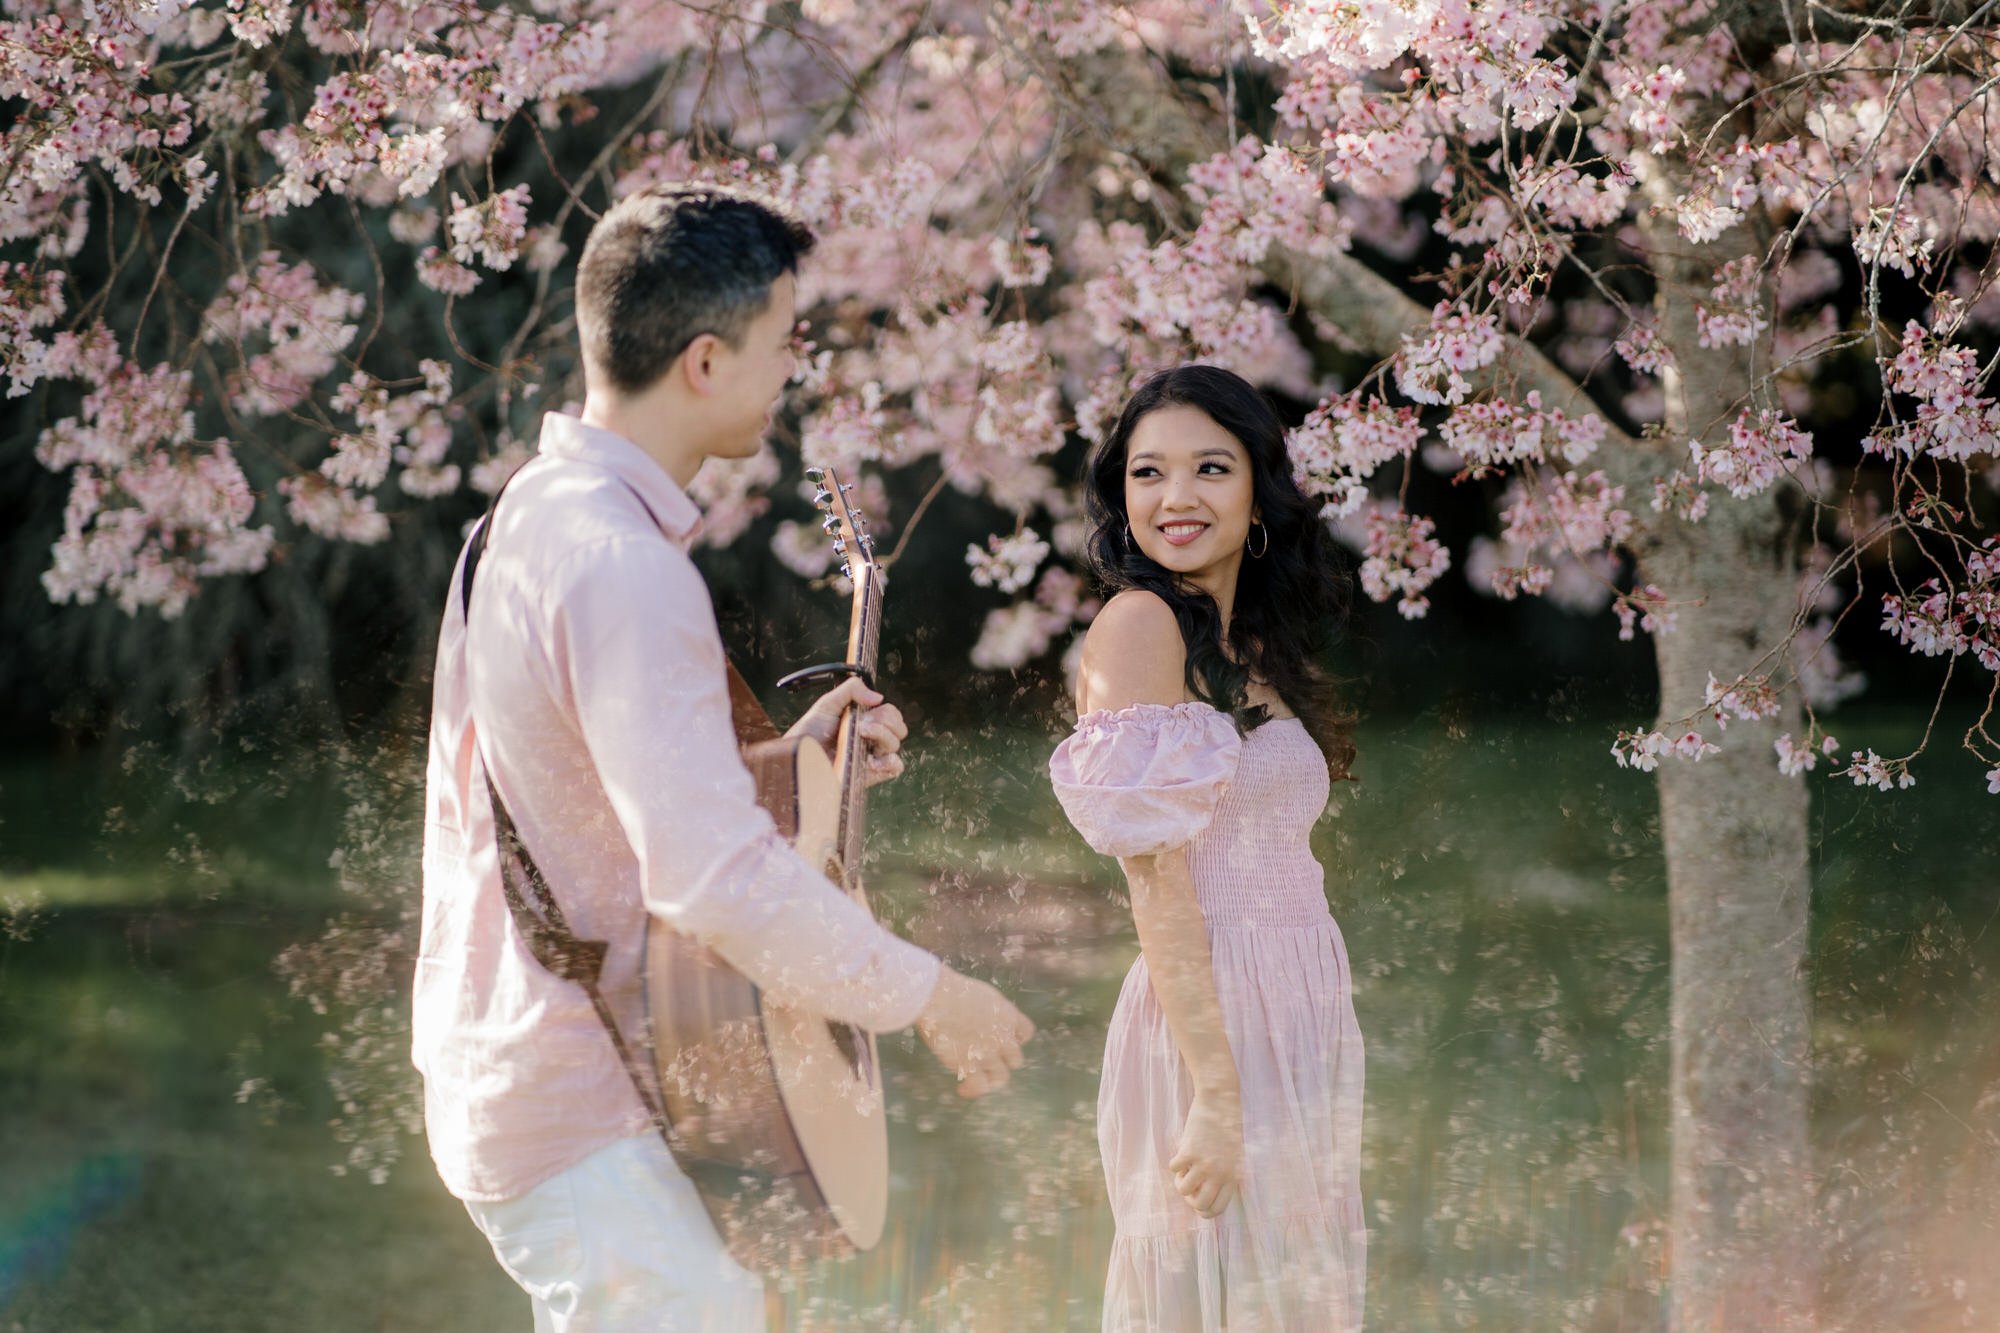 nate-and-thea-singers-duo-2023-top-auckland-wedding-phtographer-photography-videography-film-new-zealand-NZ-best-band-cherry-blossom-botanical-garden-engagement-elopement-dear-white-productions (3).jpg